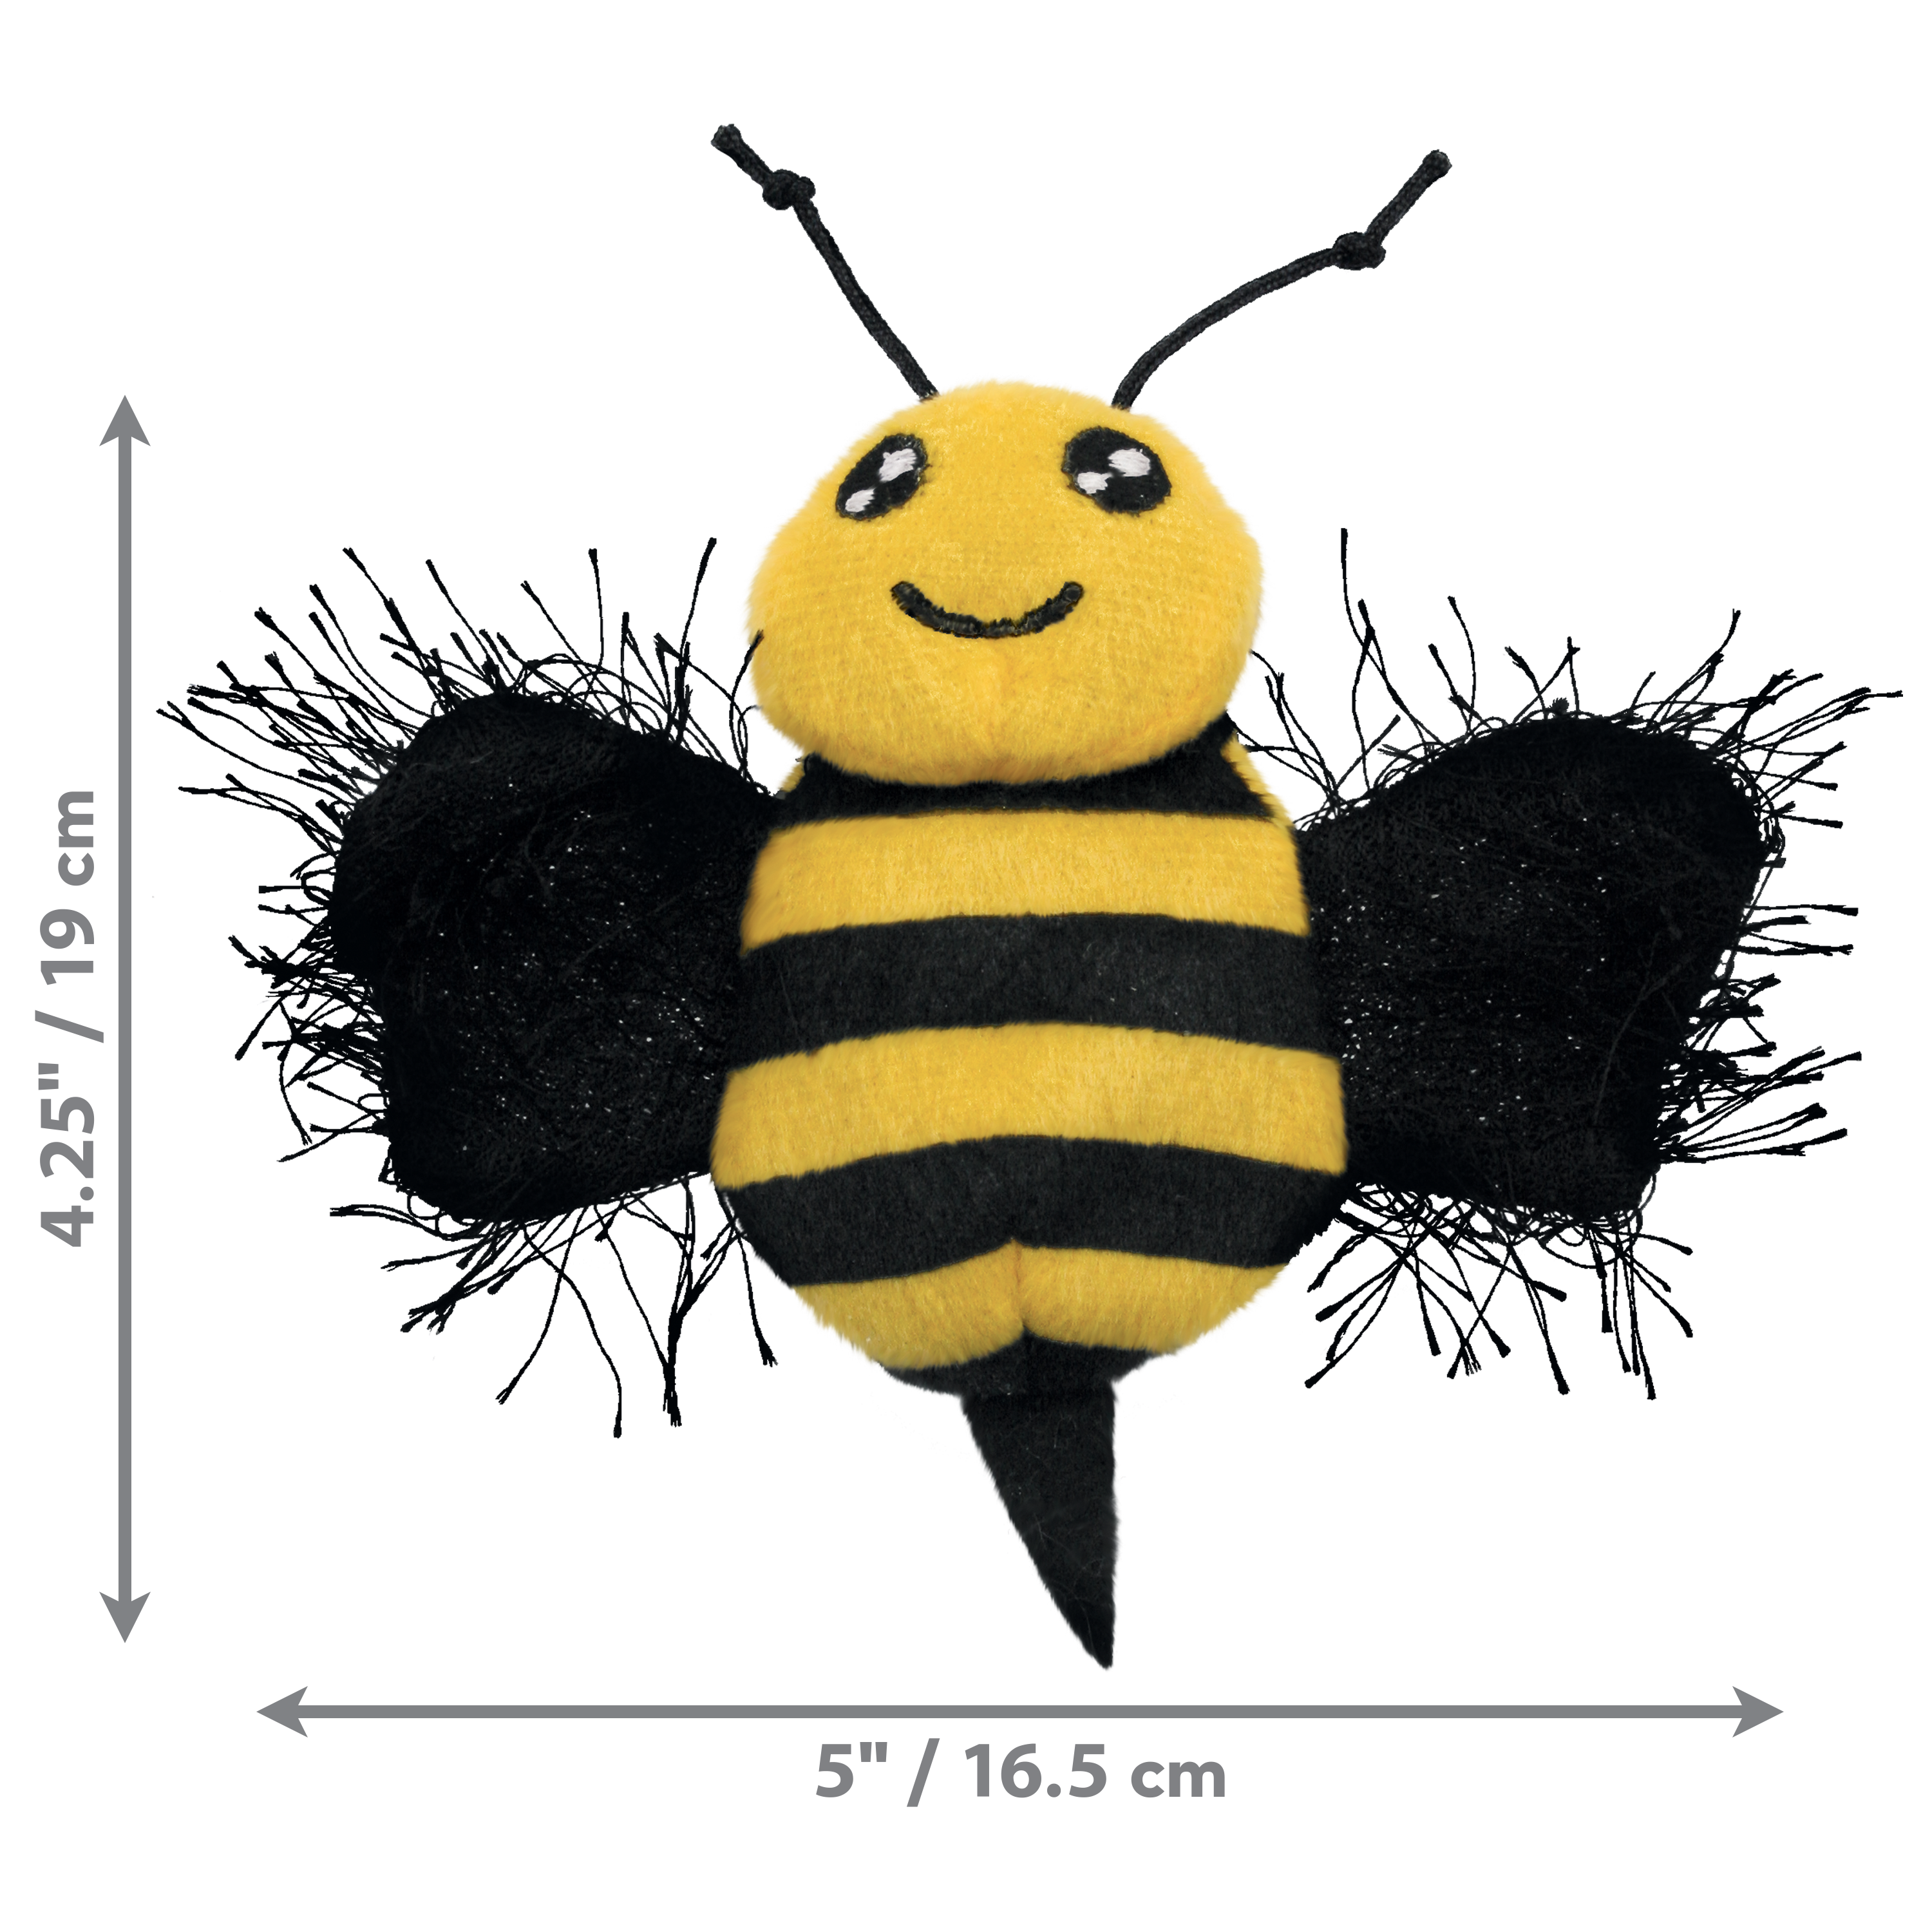 Better Buzz Bee dimoffpack product image